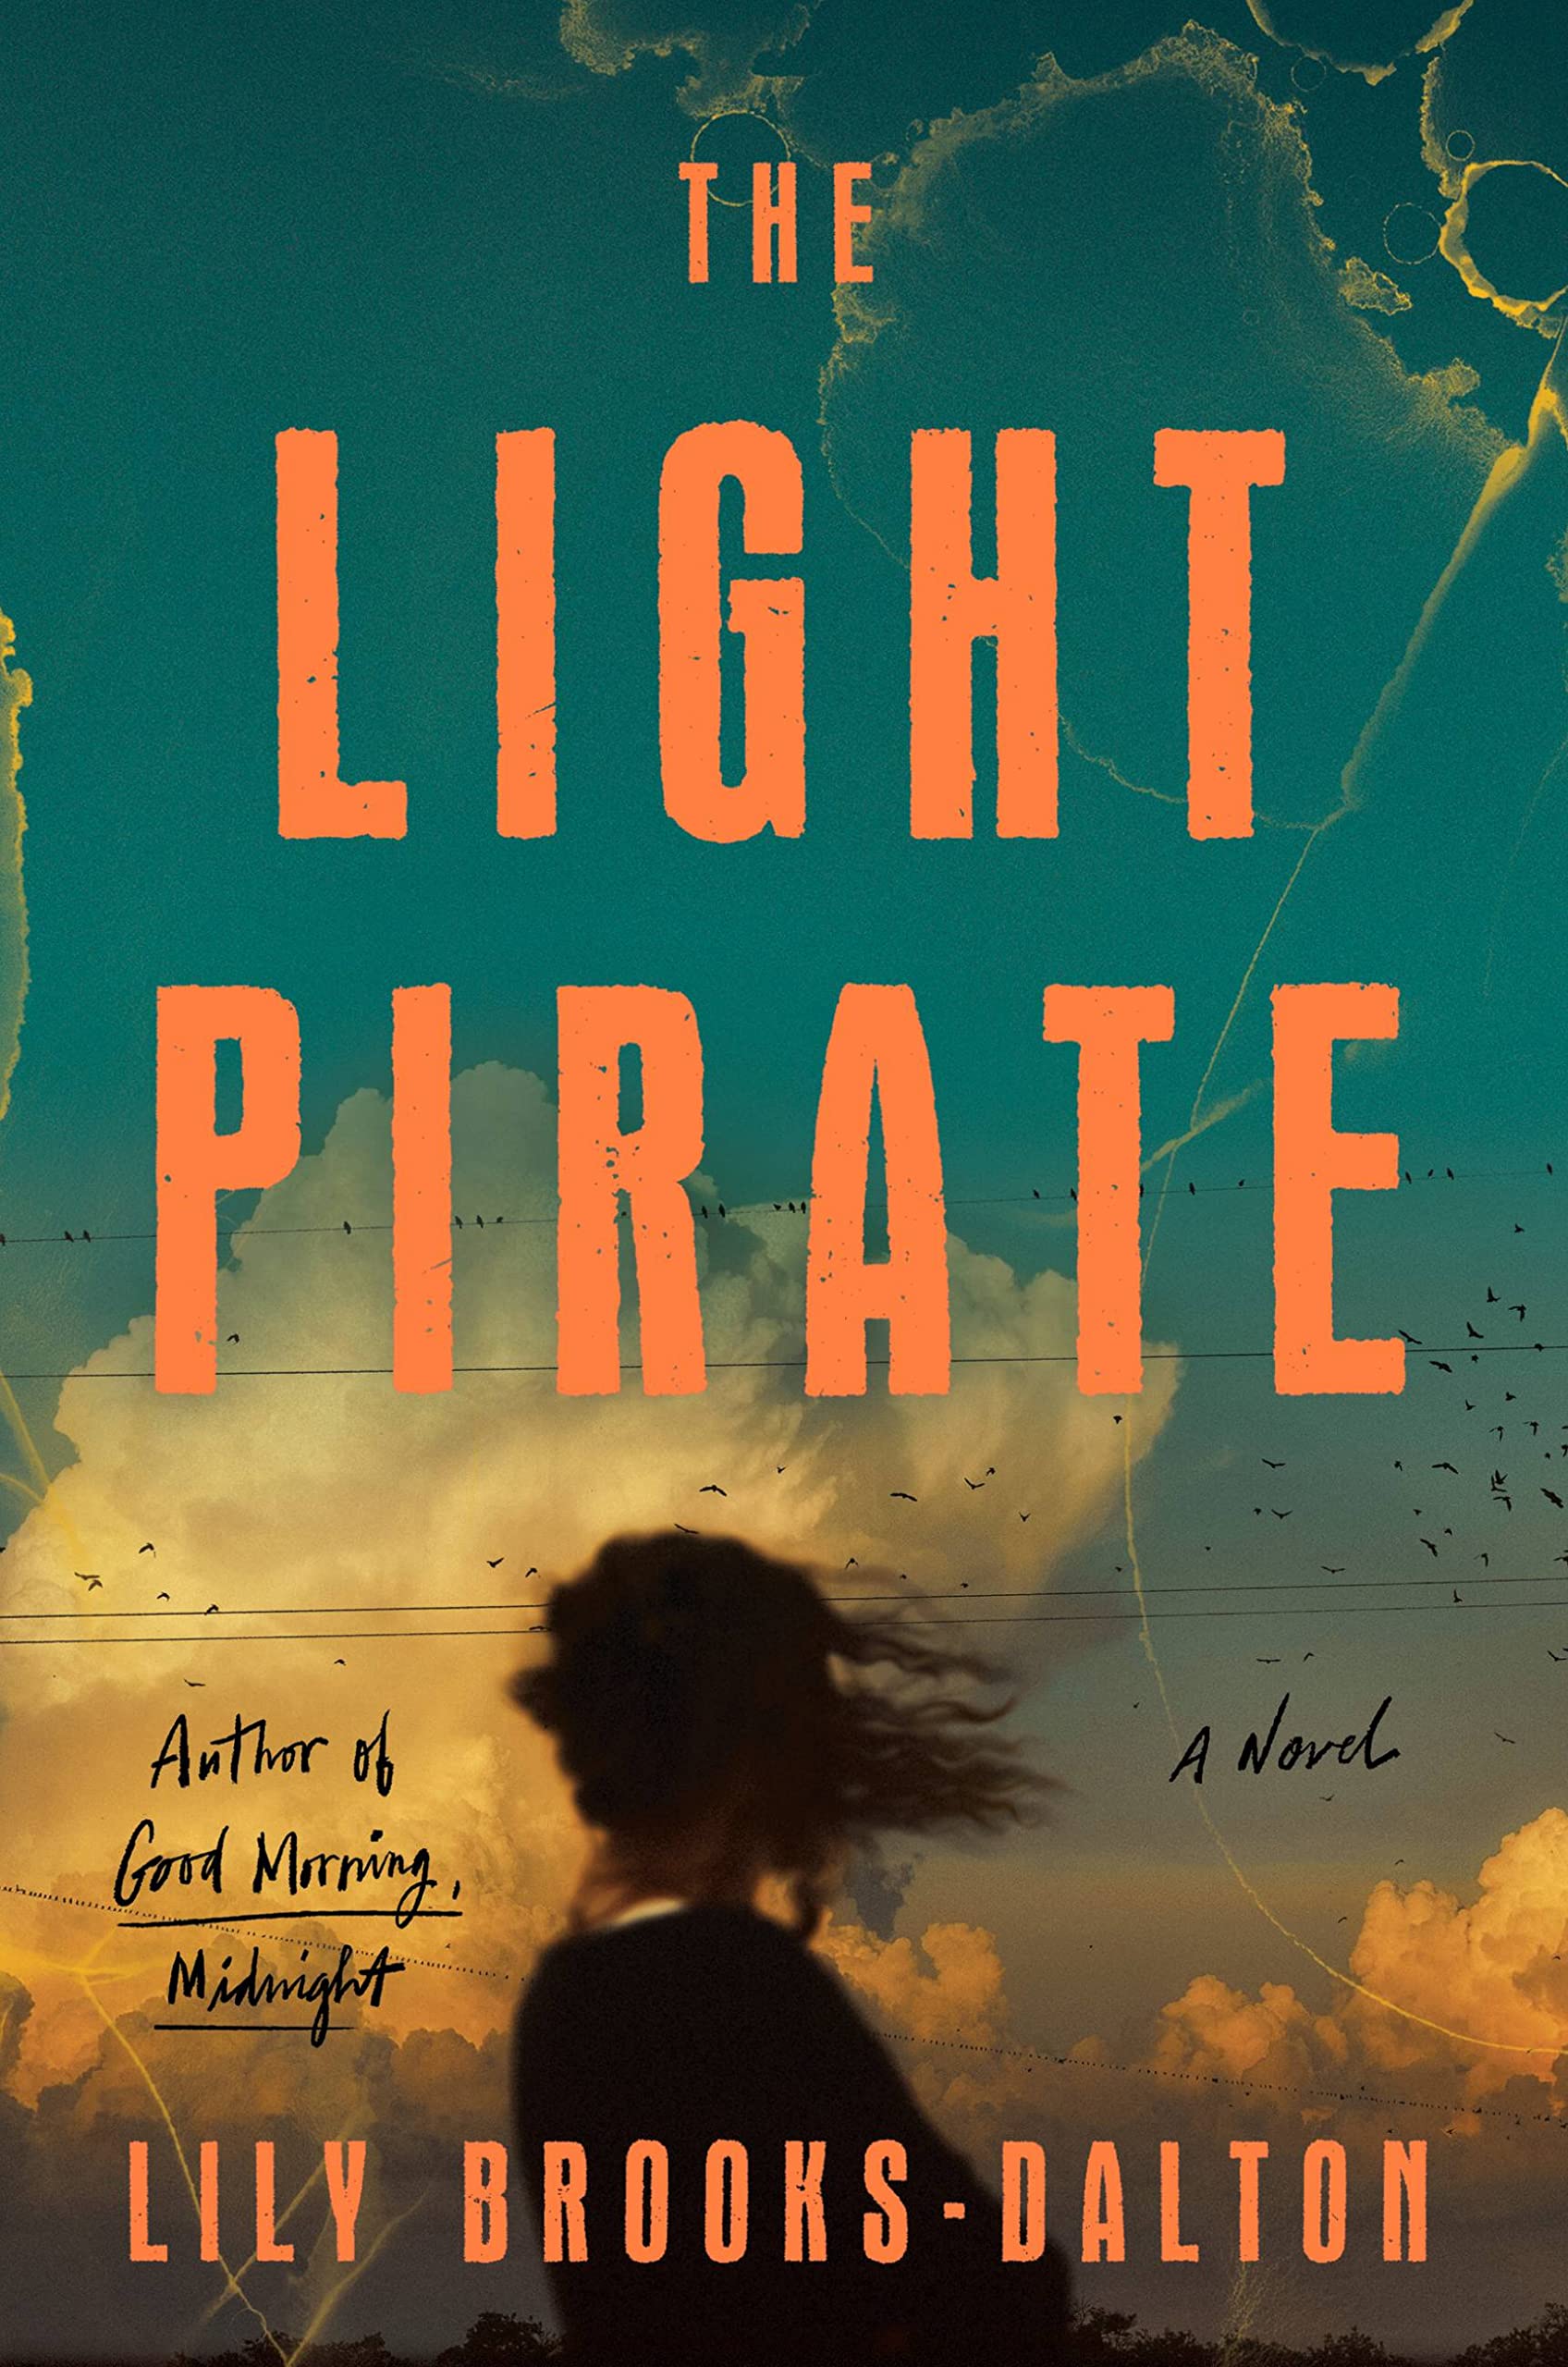 Image for "The Light Pirate"